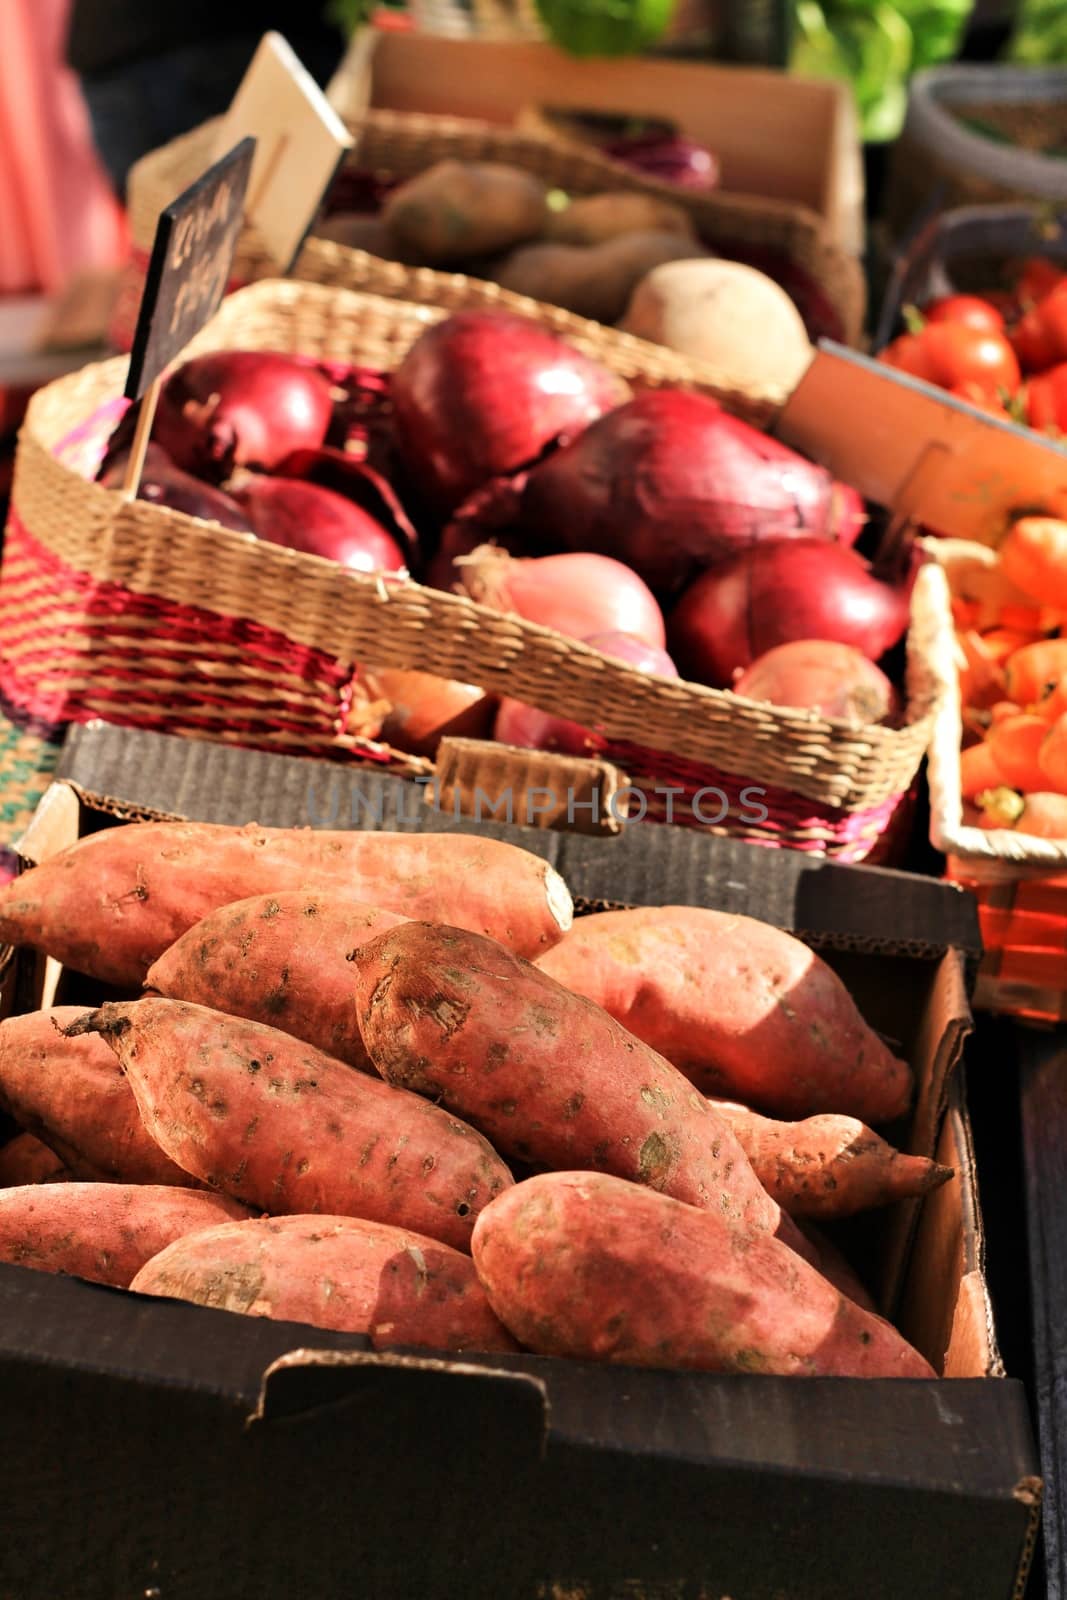 Vegetables for sale at a ecological market stall by soniabonet